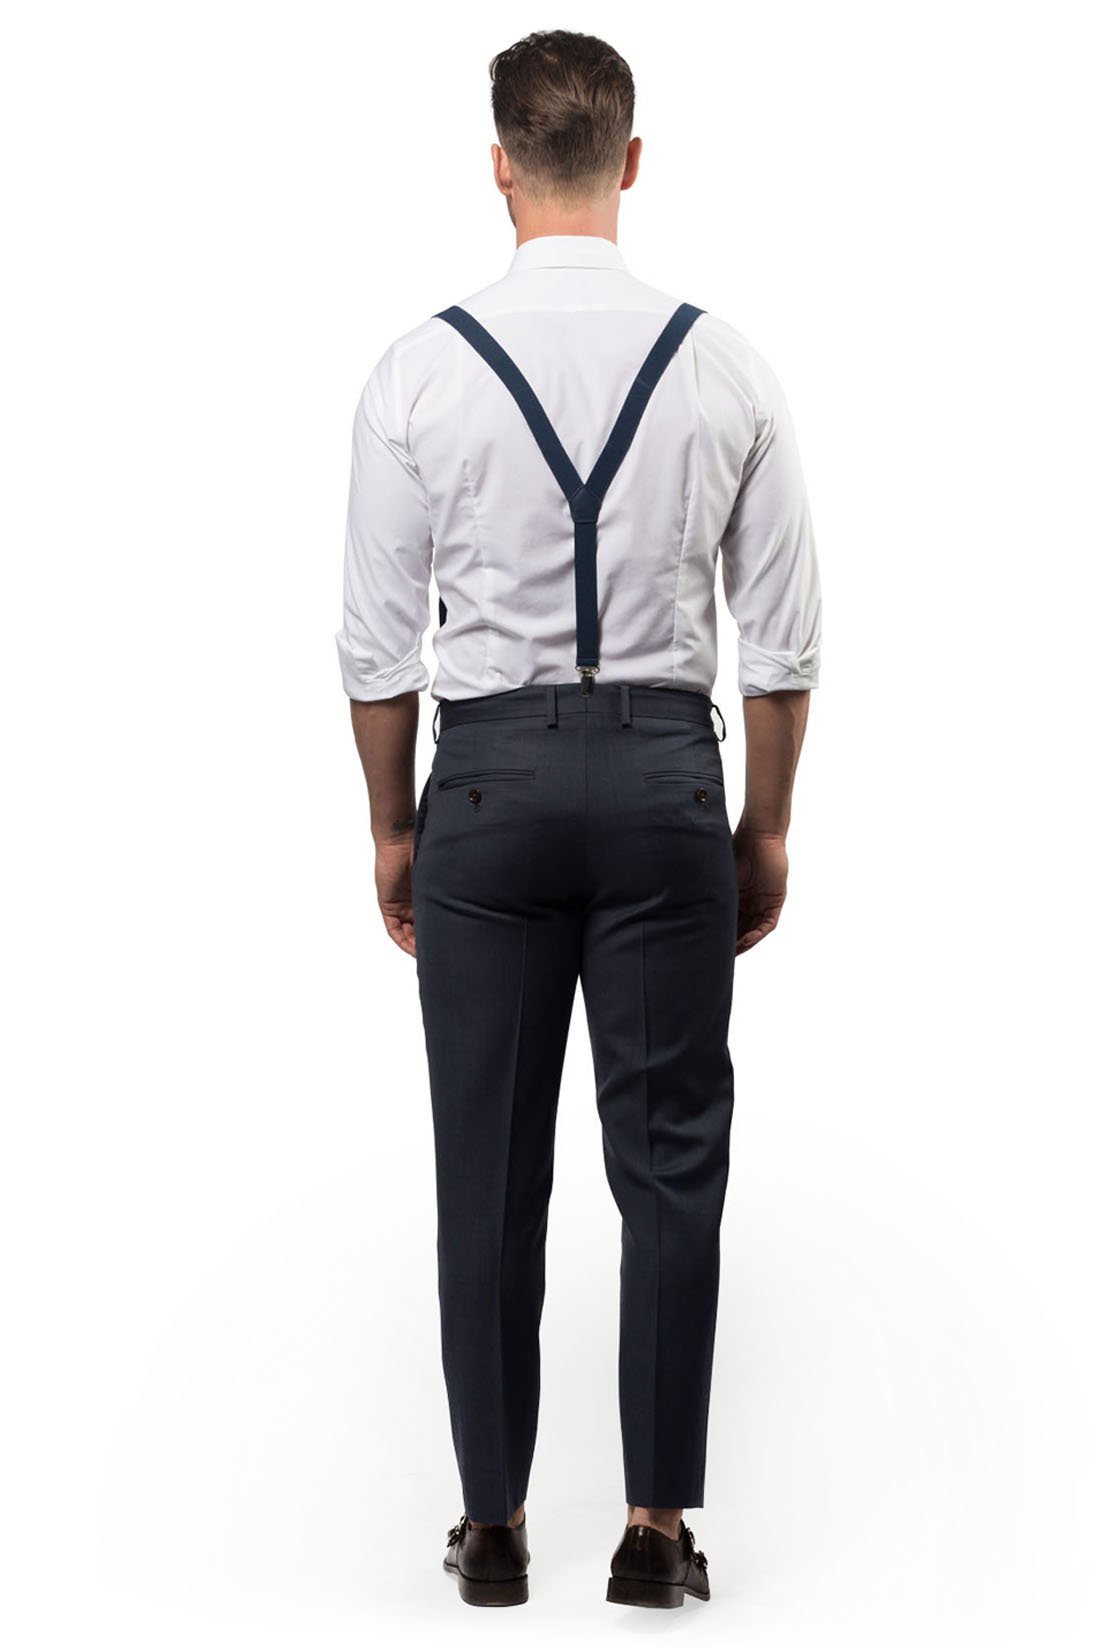 Should I wear a dark brown belt with black pants and a white shirt and black  shoes? - Quora